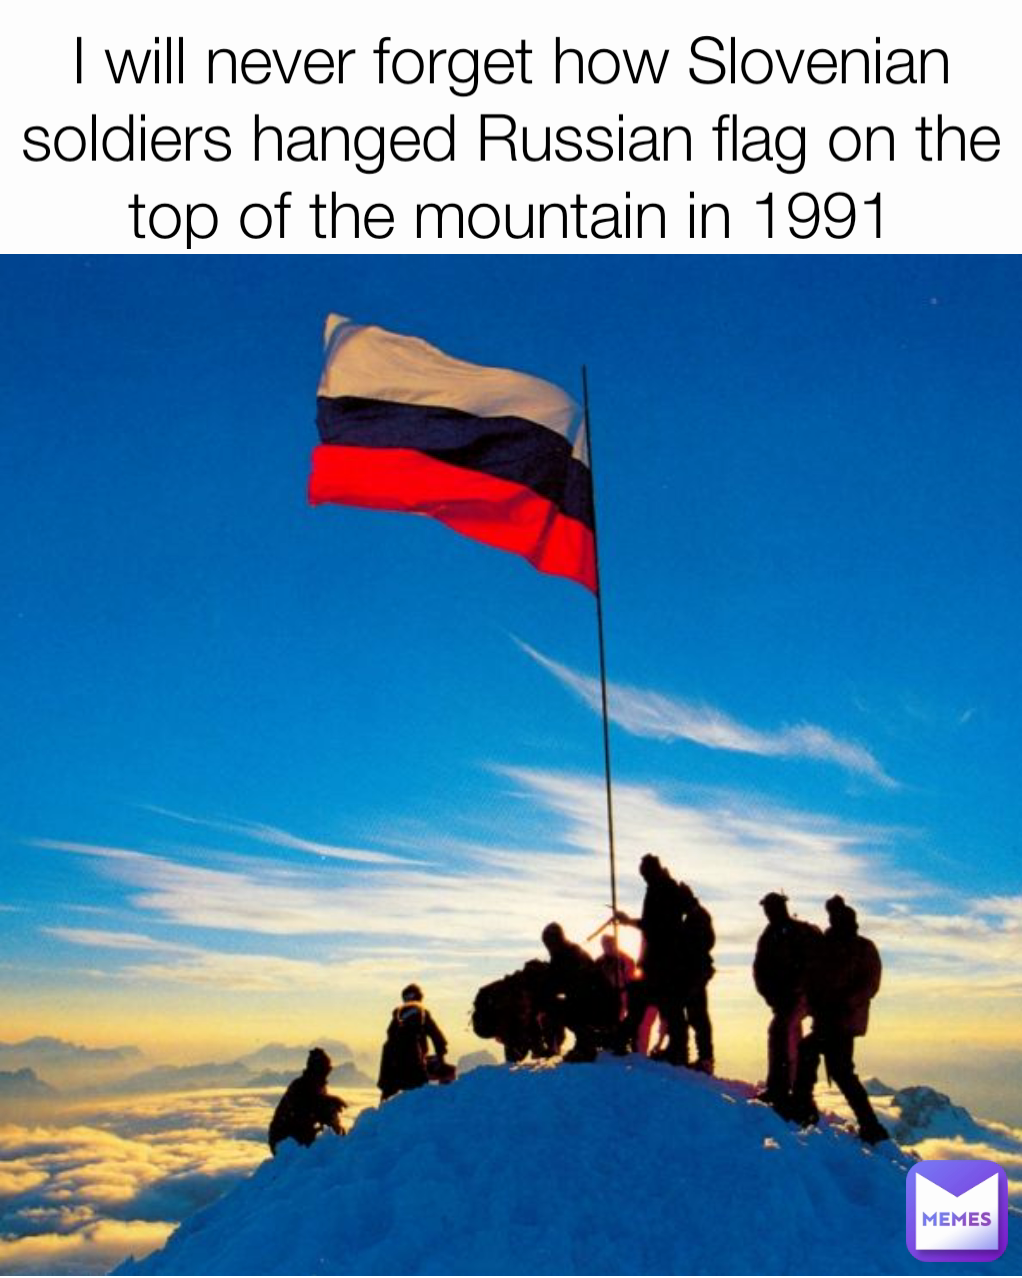 I will never forget how Slovenian soldiers hanged Russian flag on the top of the mountain in 1991